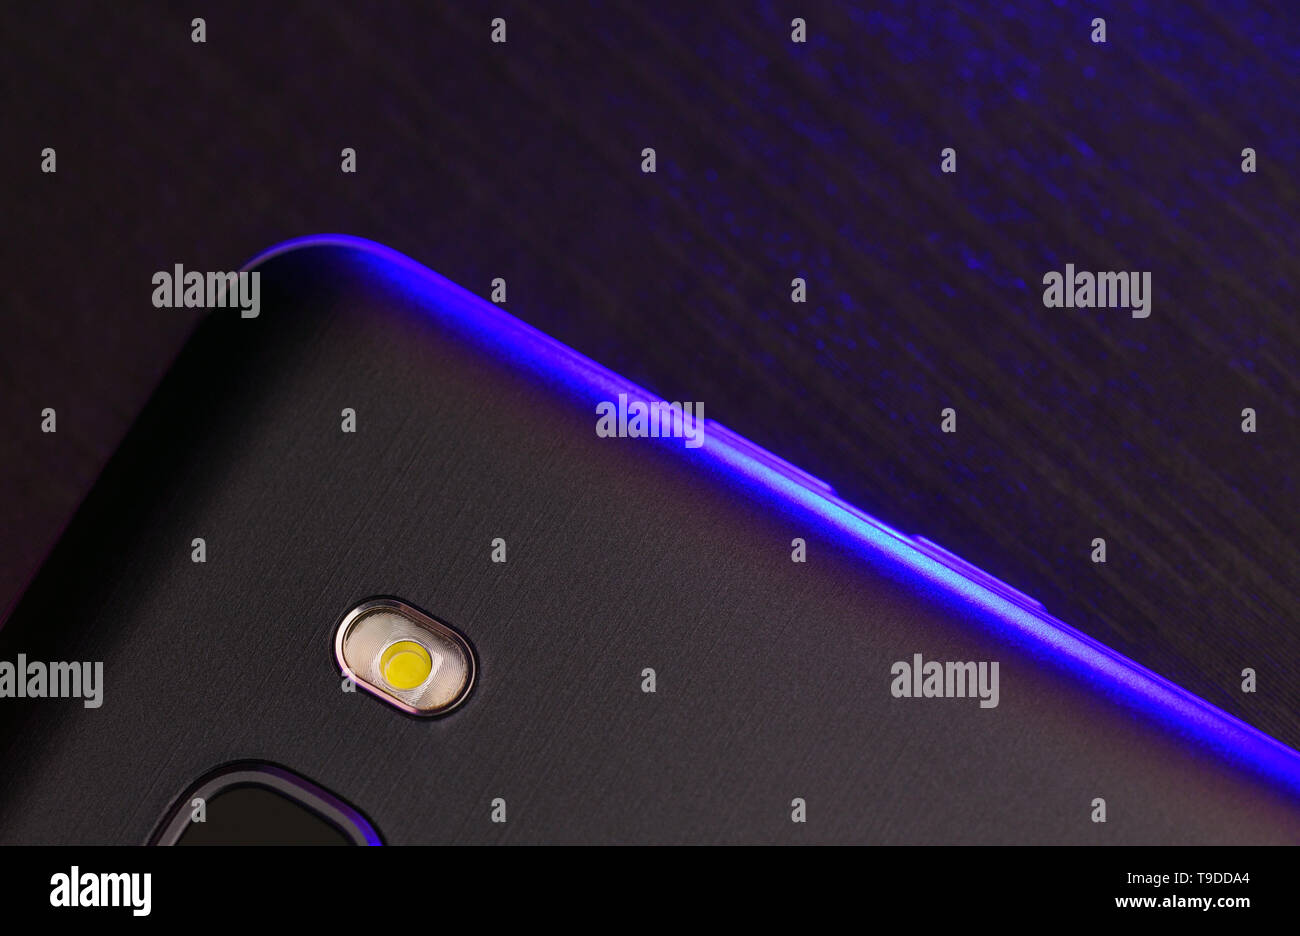 A fragment of the cell phone case in black with blue backlight. The phone lies on the black technological surface of the camera up with blue neon ligh Stock Photo